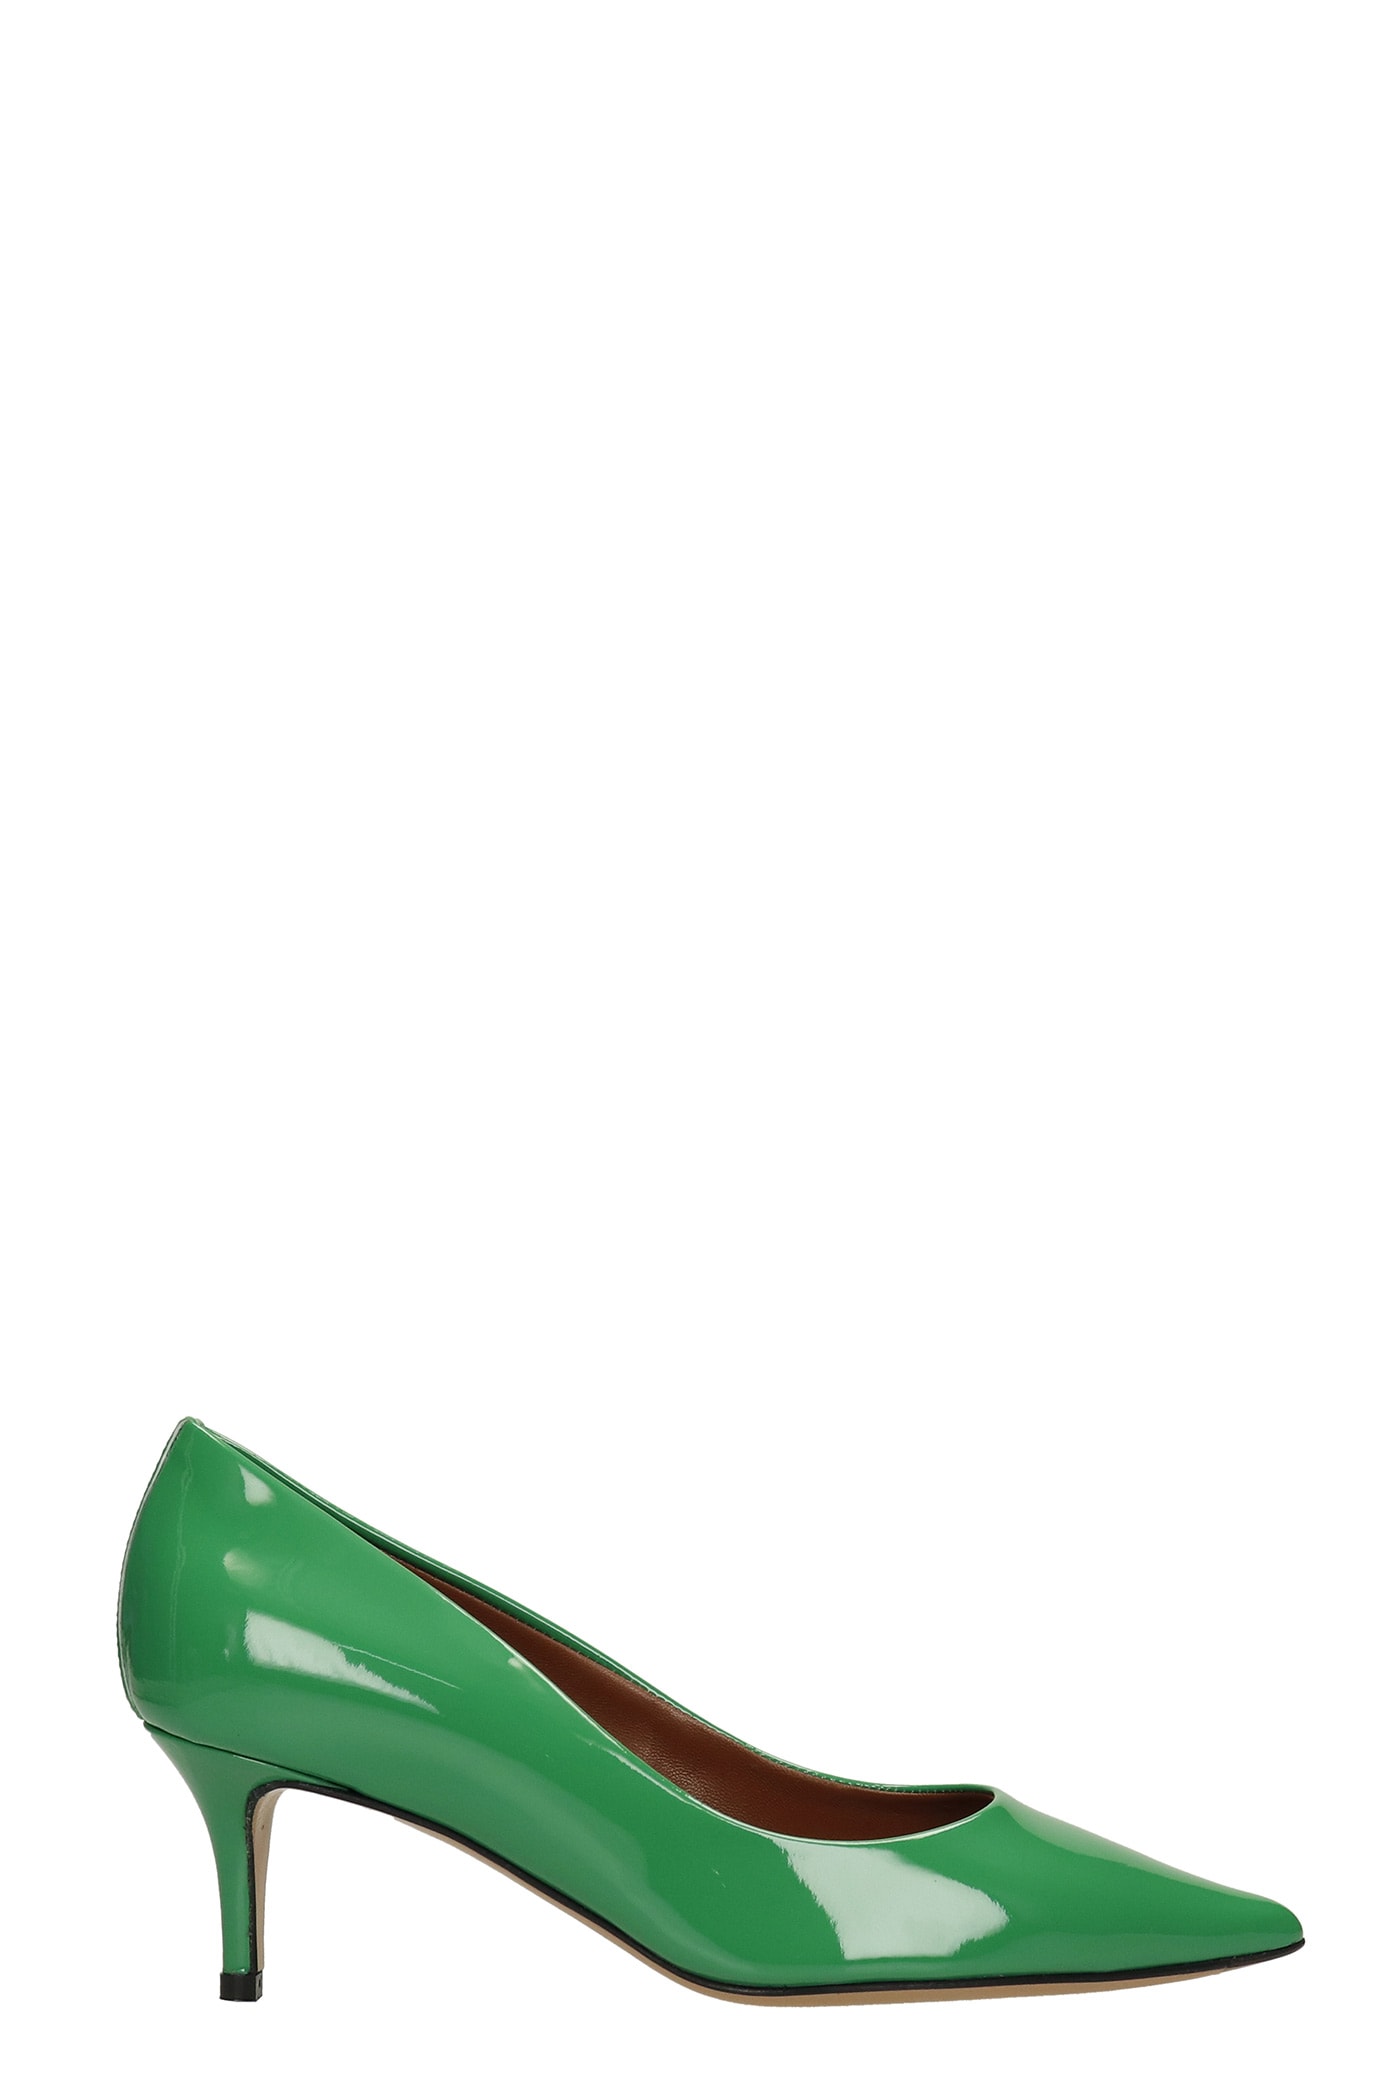 Marc Ellis Donna Pumps In Green Patent Leather